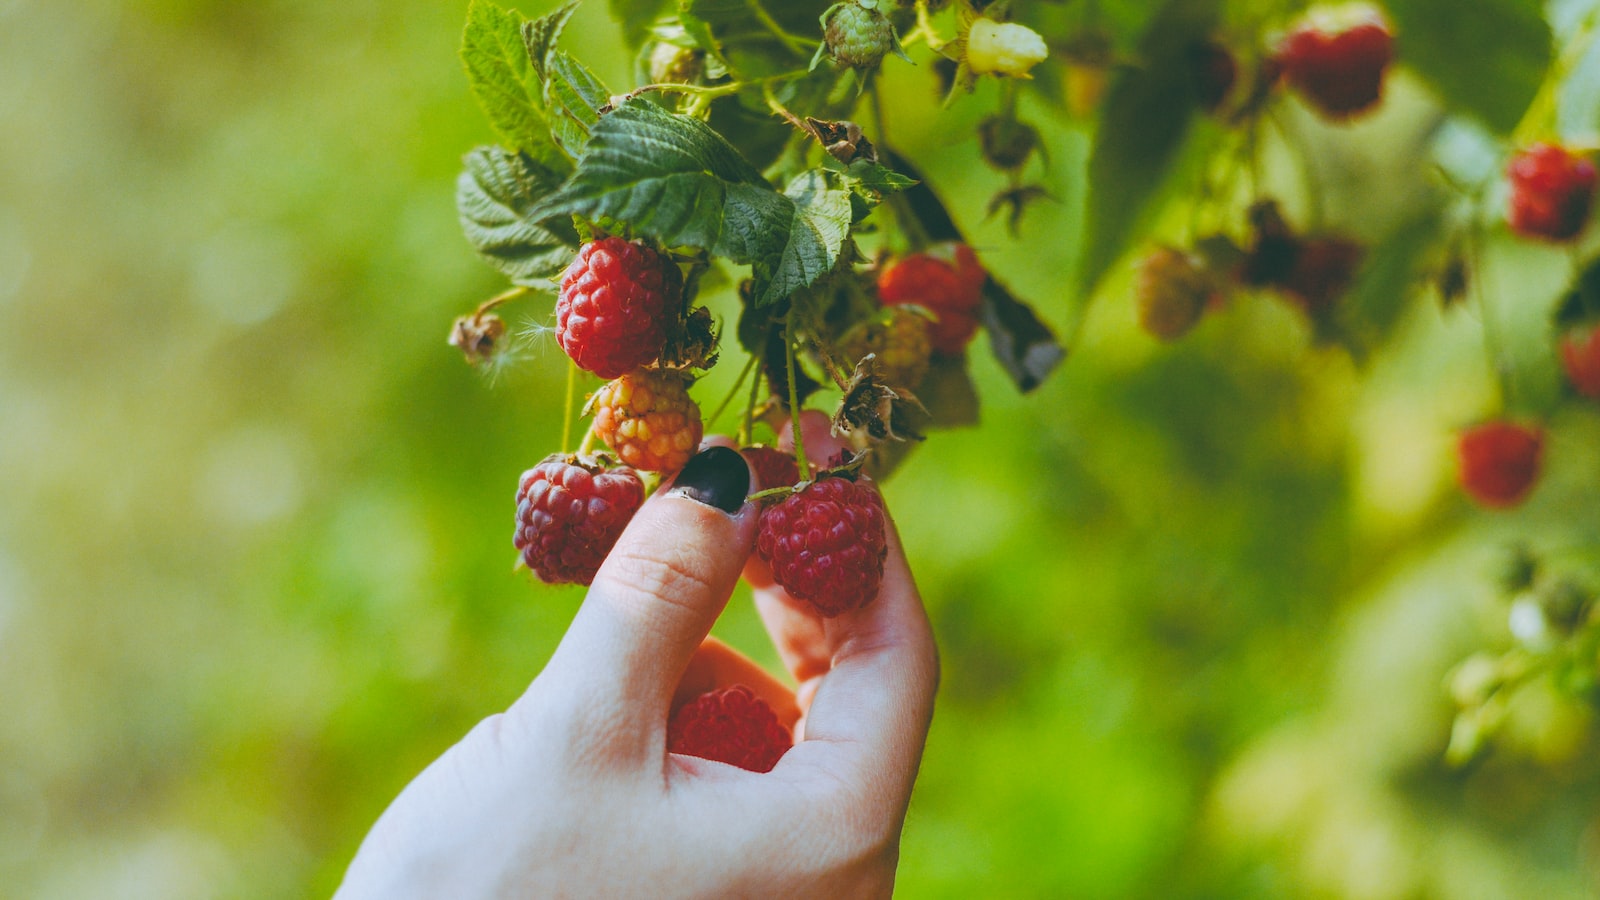 2. From Farm to Plate: Unleashing the Joy of Fruit Picking and Savoring the Freshest Flavors